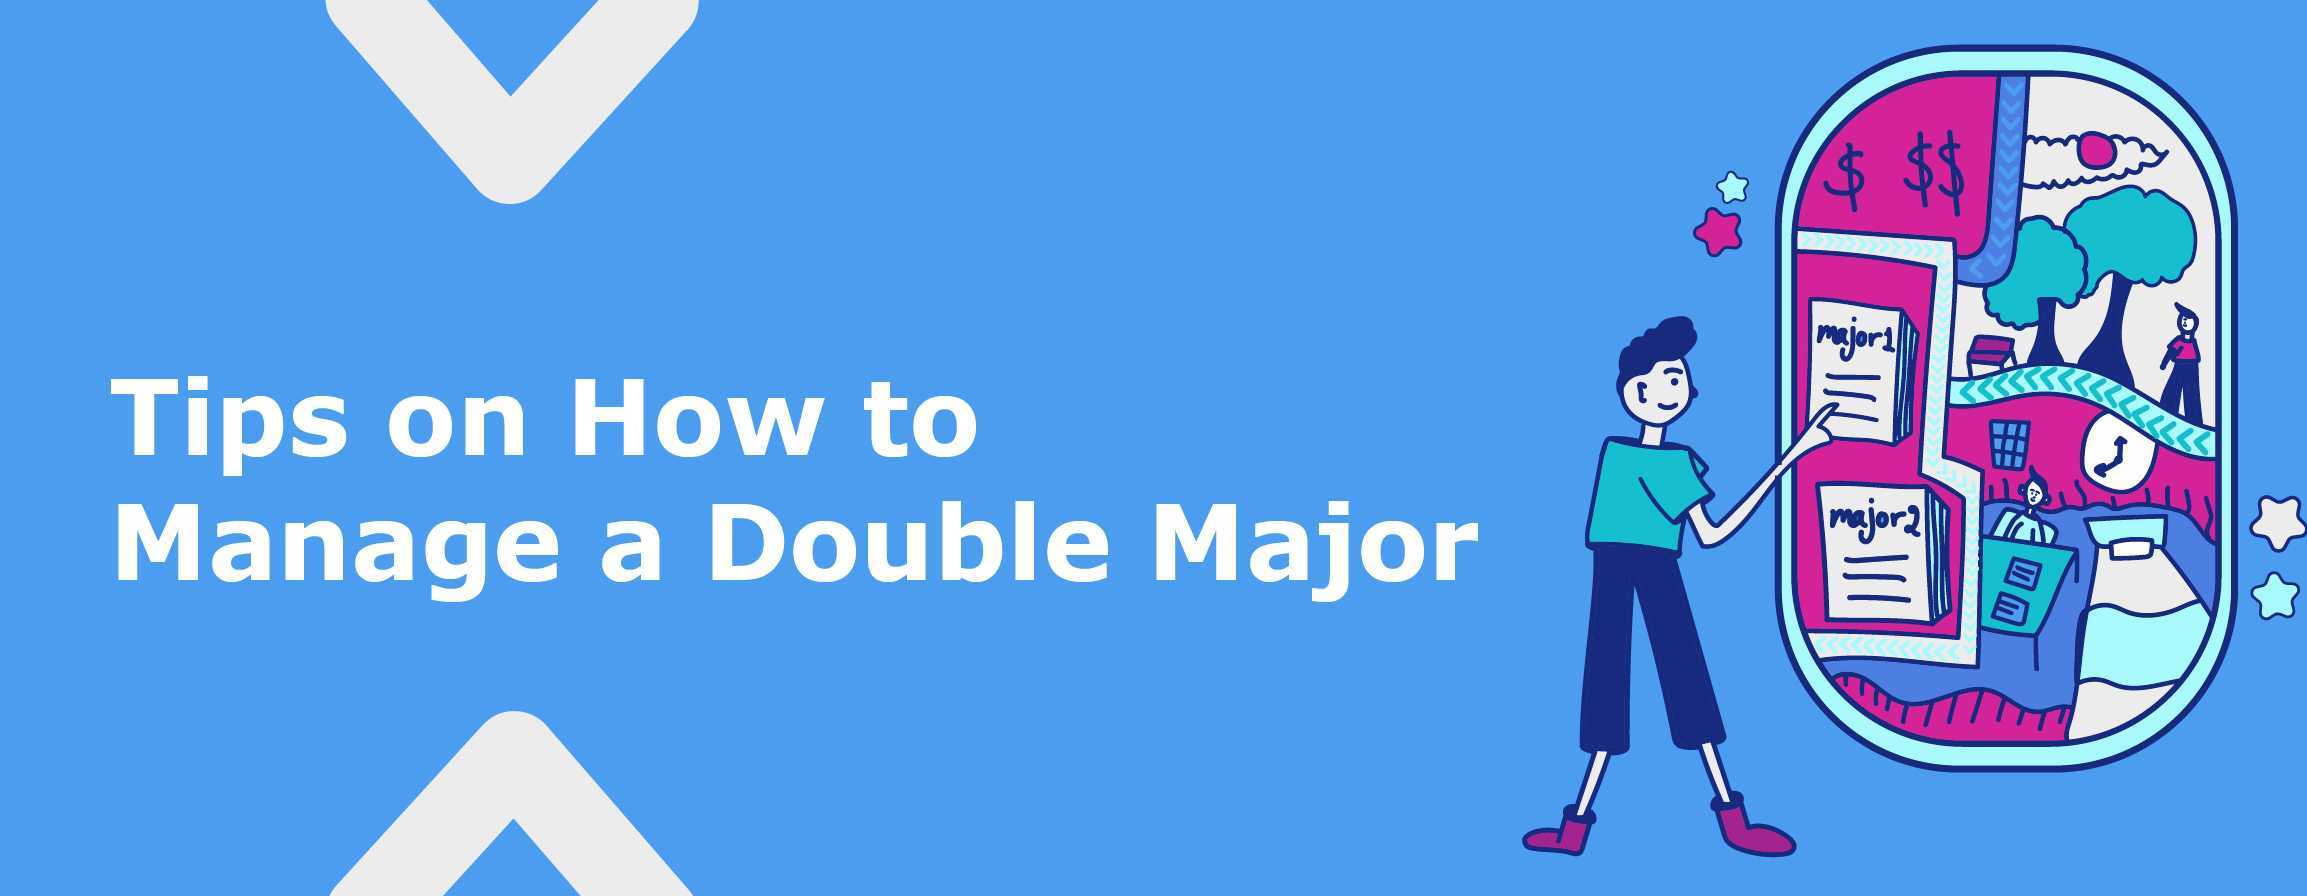 Tips on How to Manage a Double Major